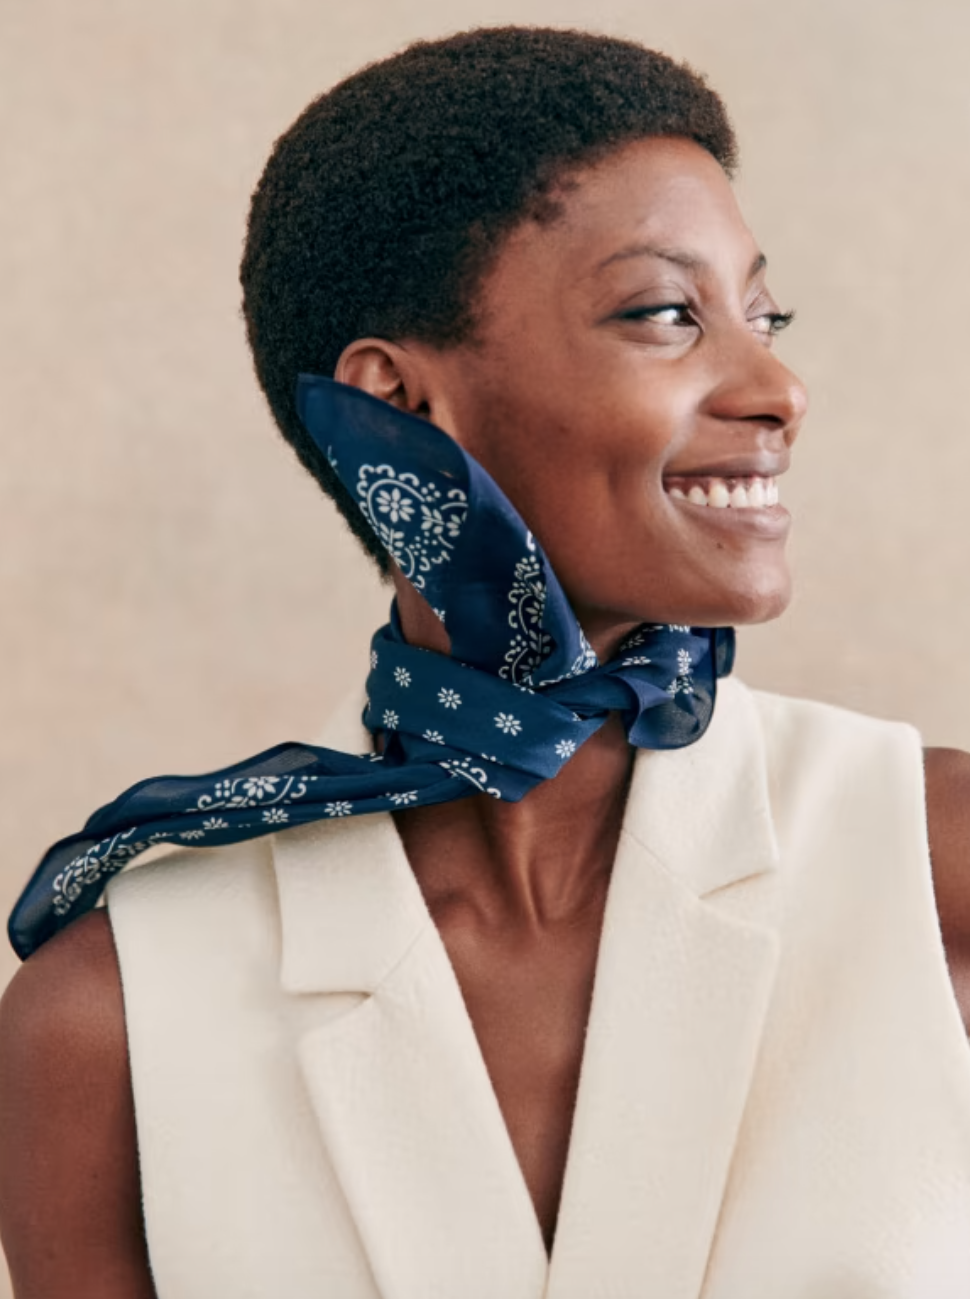 The natty silk neckerchief for an instant outfit boost